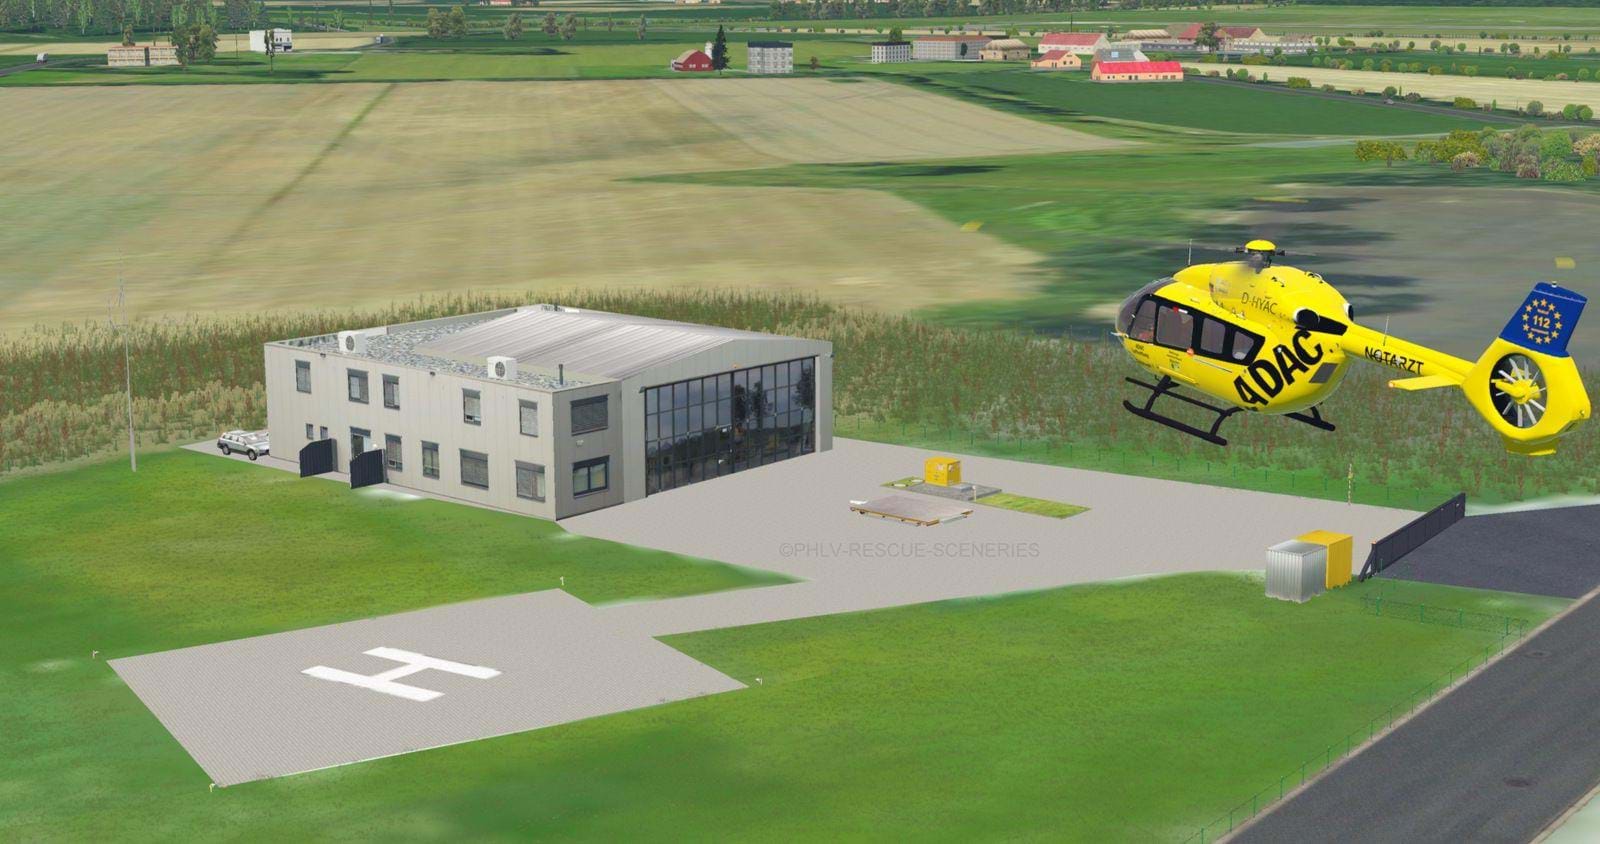 PHLV Rescue Sceneries, is developing helicopter scenery for X-Plane